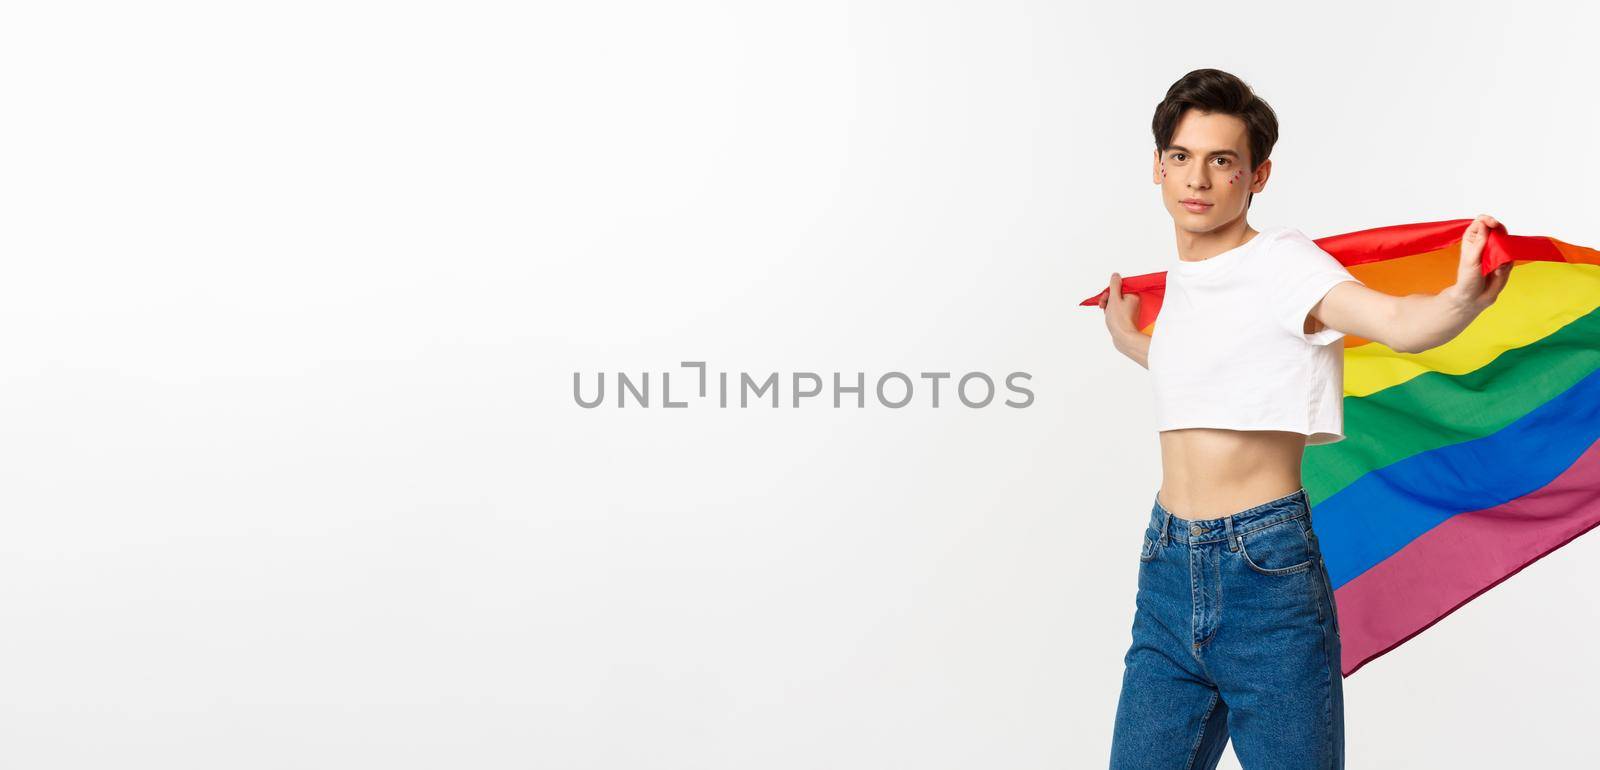 Human rights and lgbtq community concept. Out and proud gay man waving rainbow flag and looking confident at camera, standing in crop top and jeans against white background.